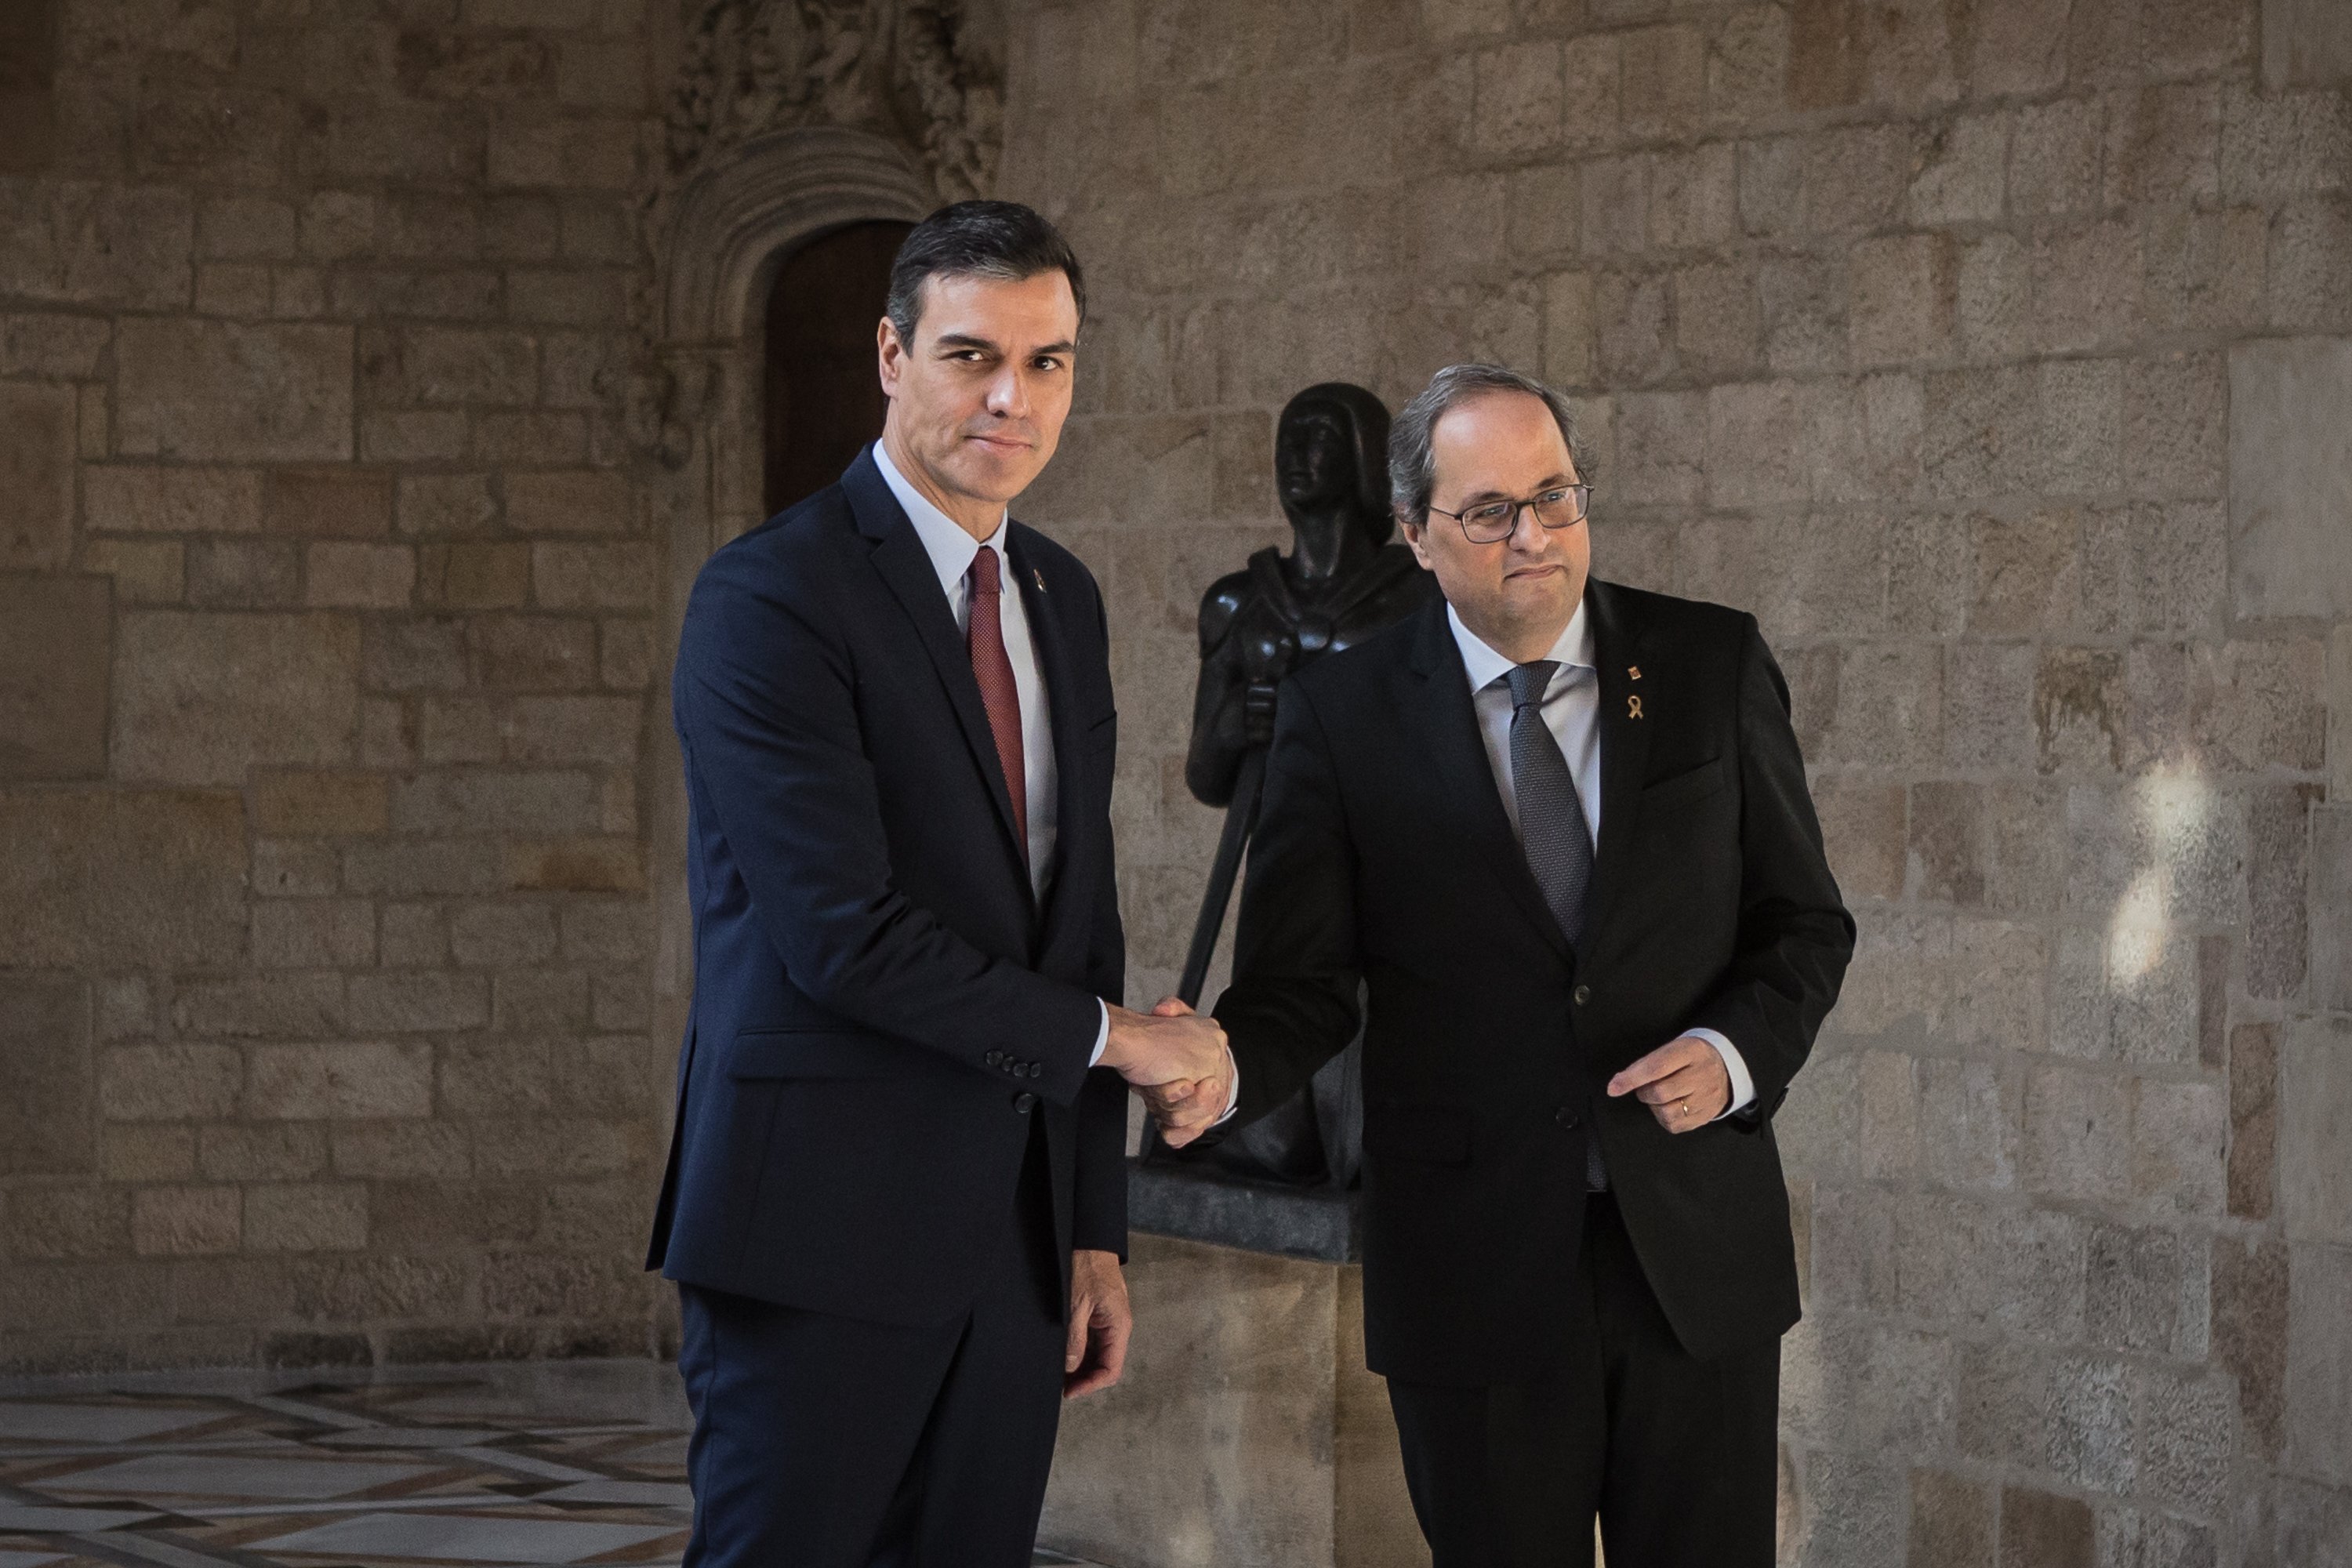 Pedro Sánchez on dialogue with Catalonia: "We're not afraid to talk about anything"